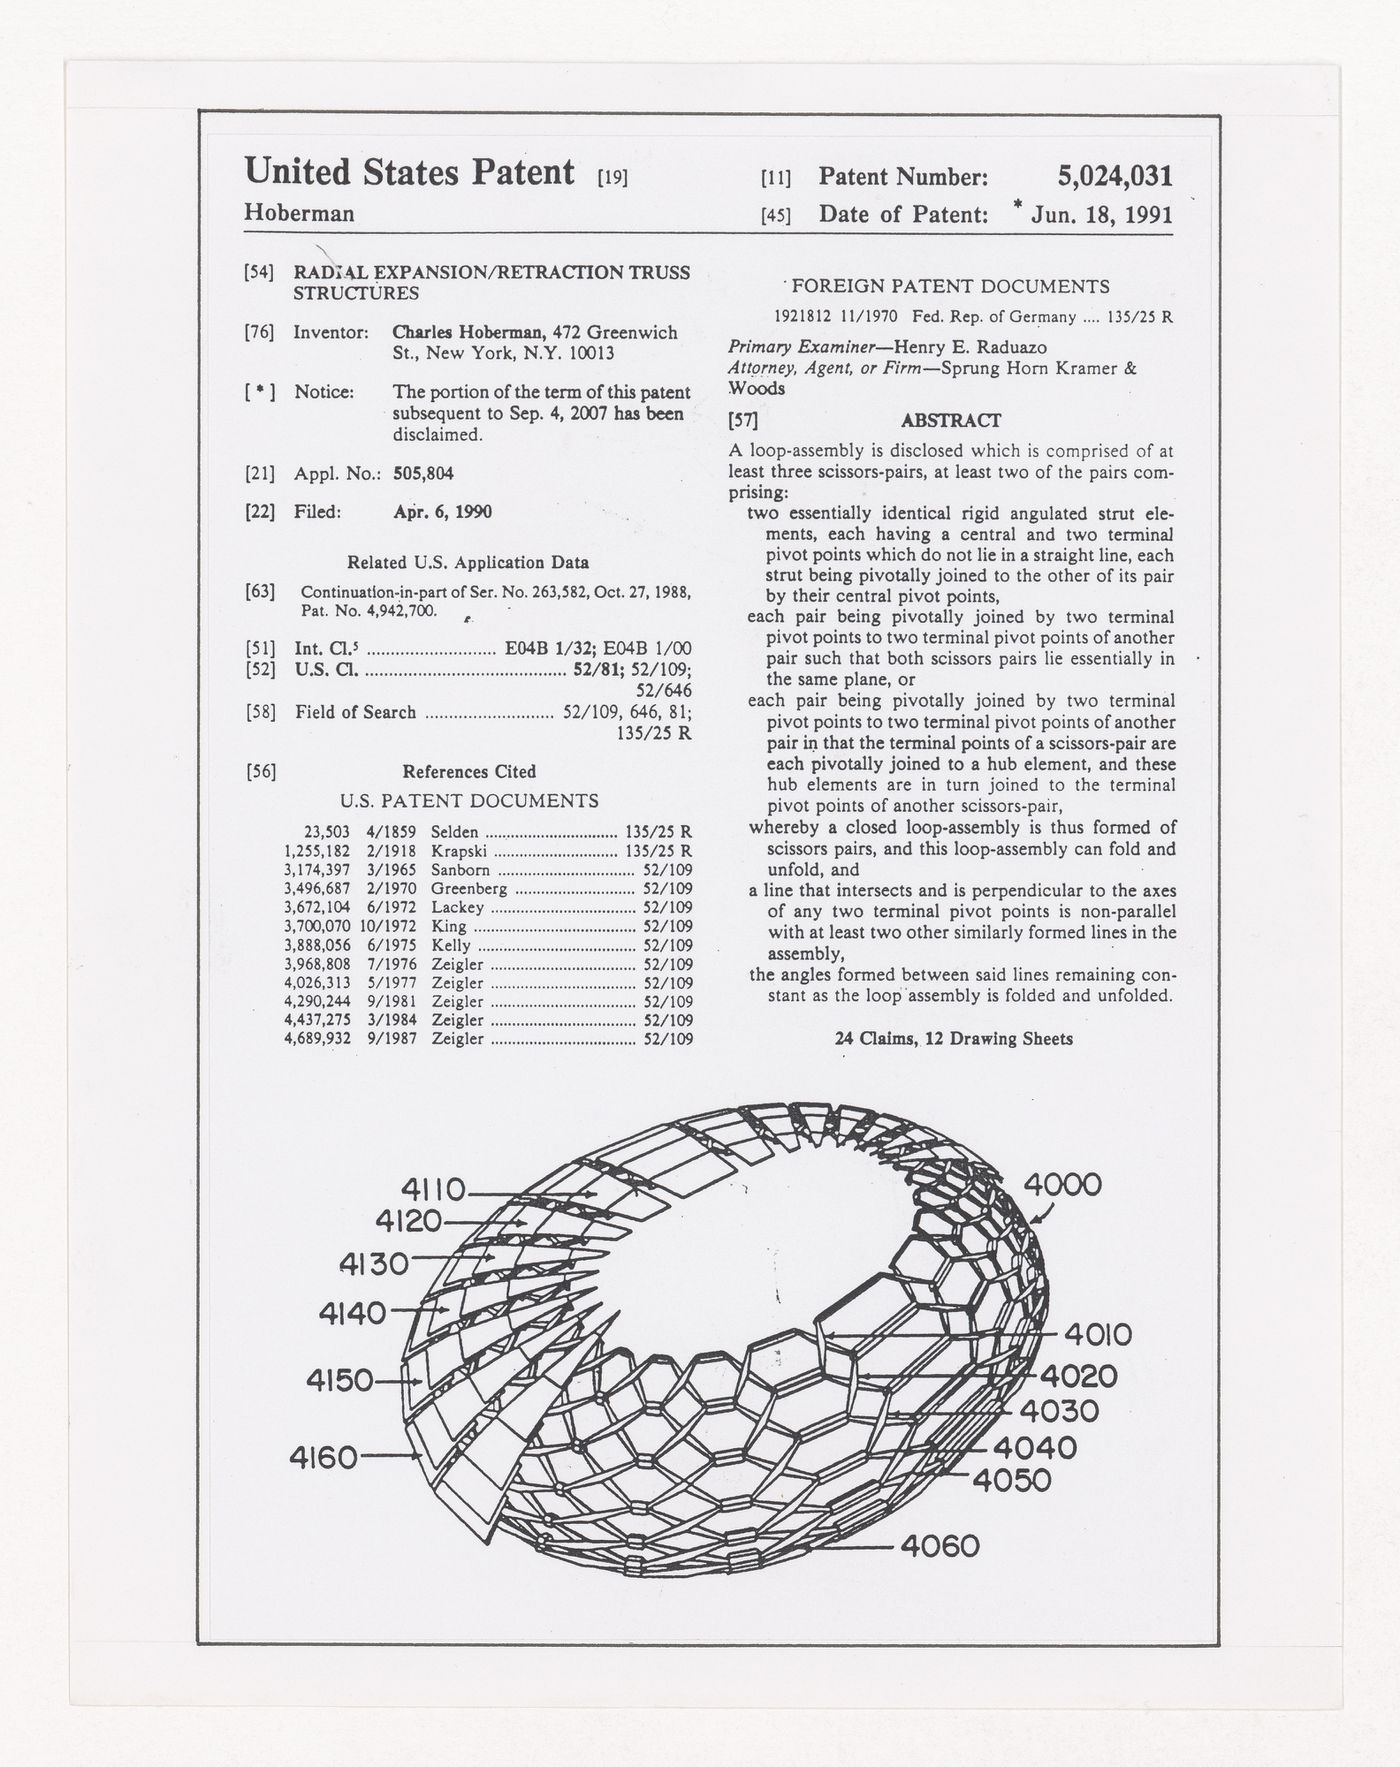 Patent for radial expansion/retraction truss structures (United States Patent Number 5,024,031)